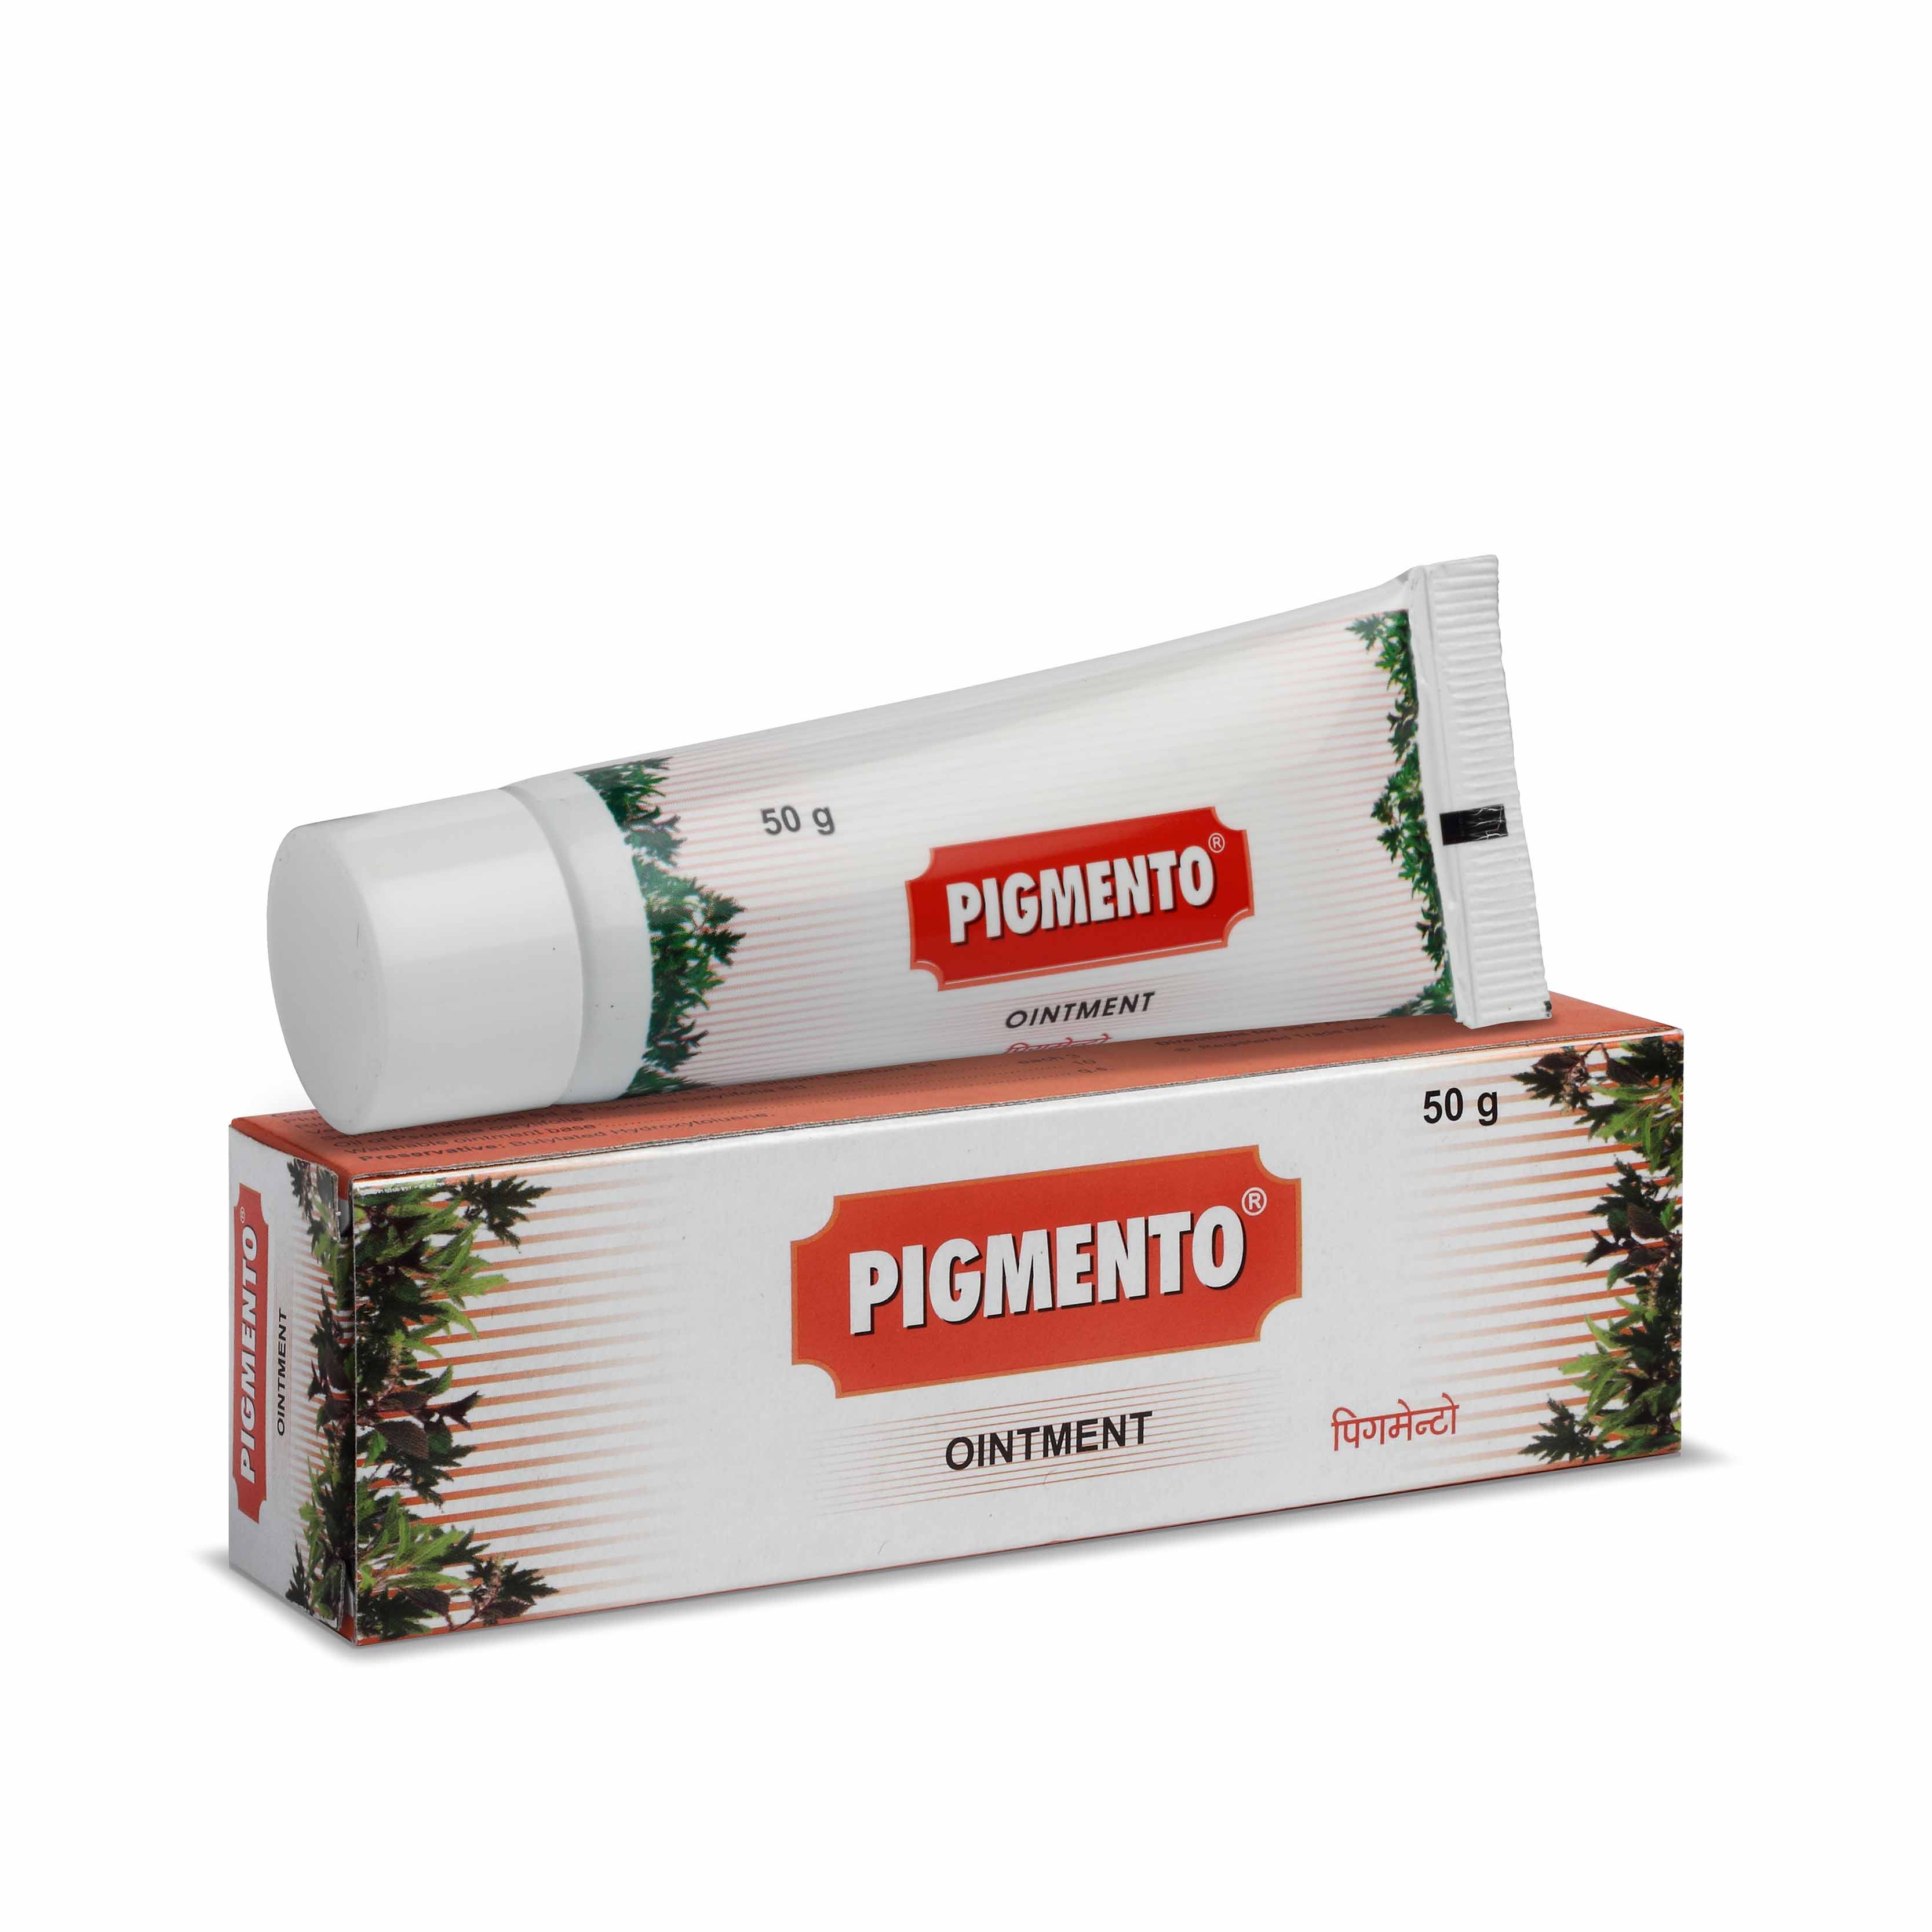 10 % Off Charak Pigmento Ointment